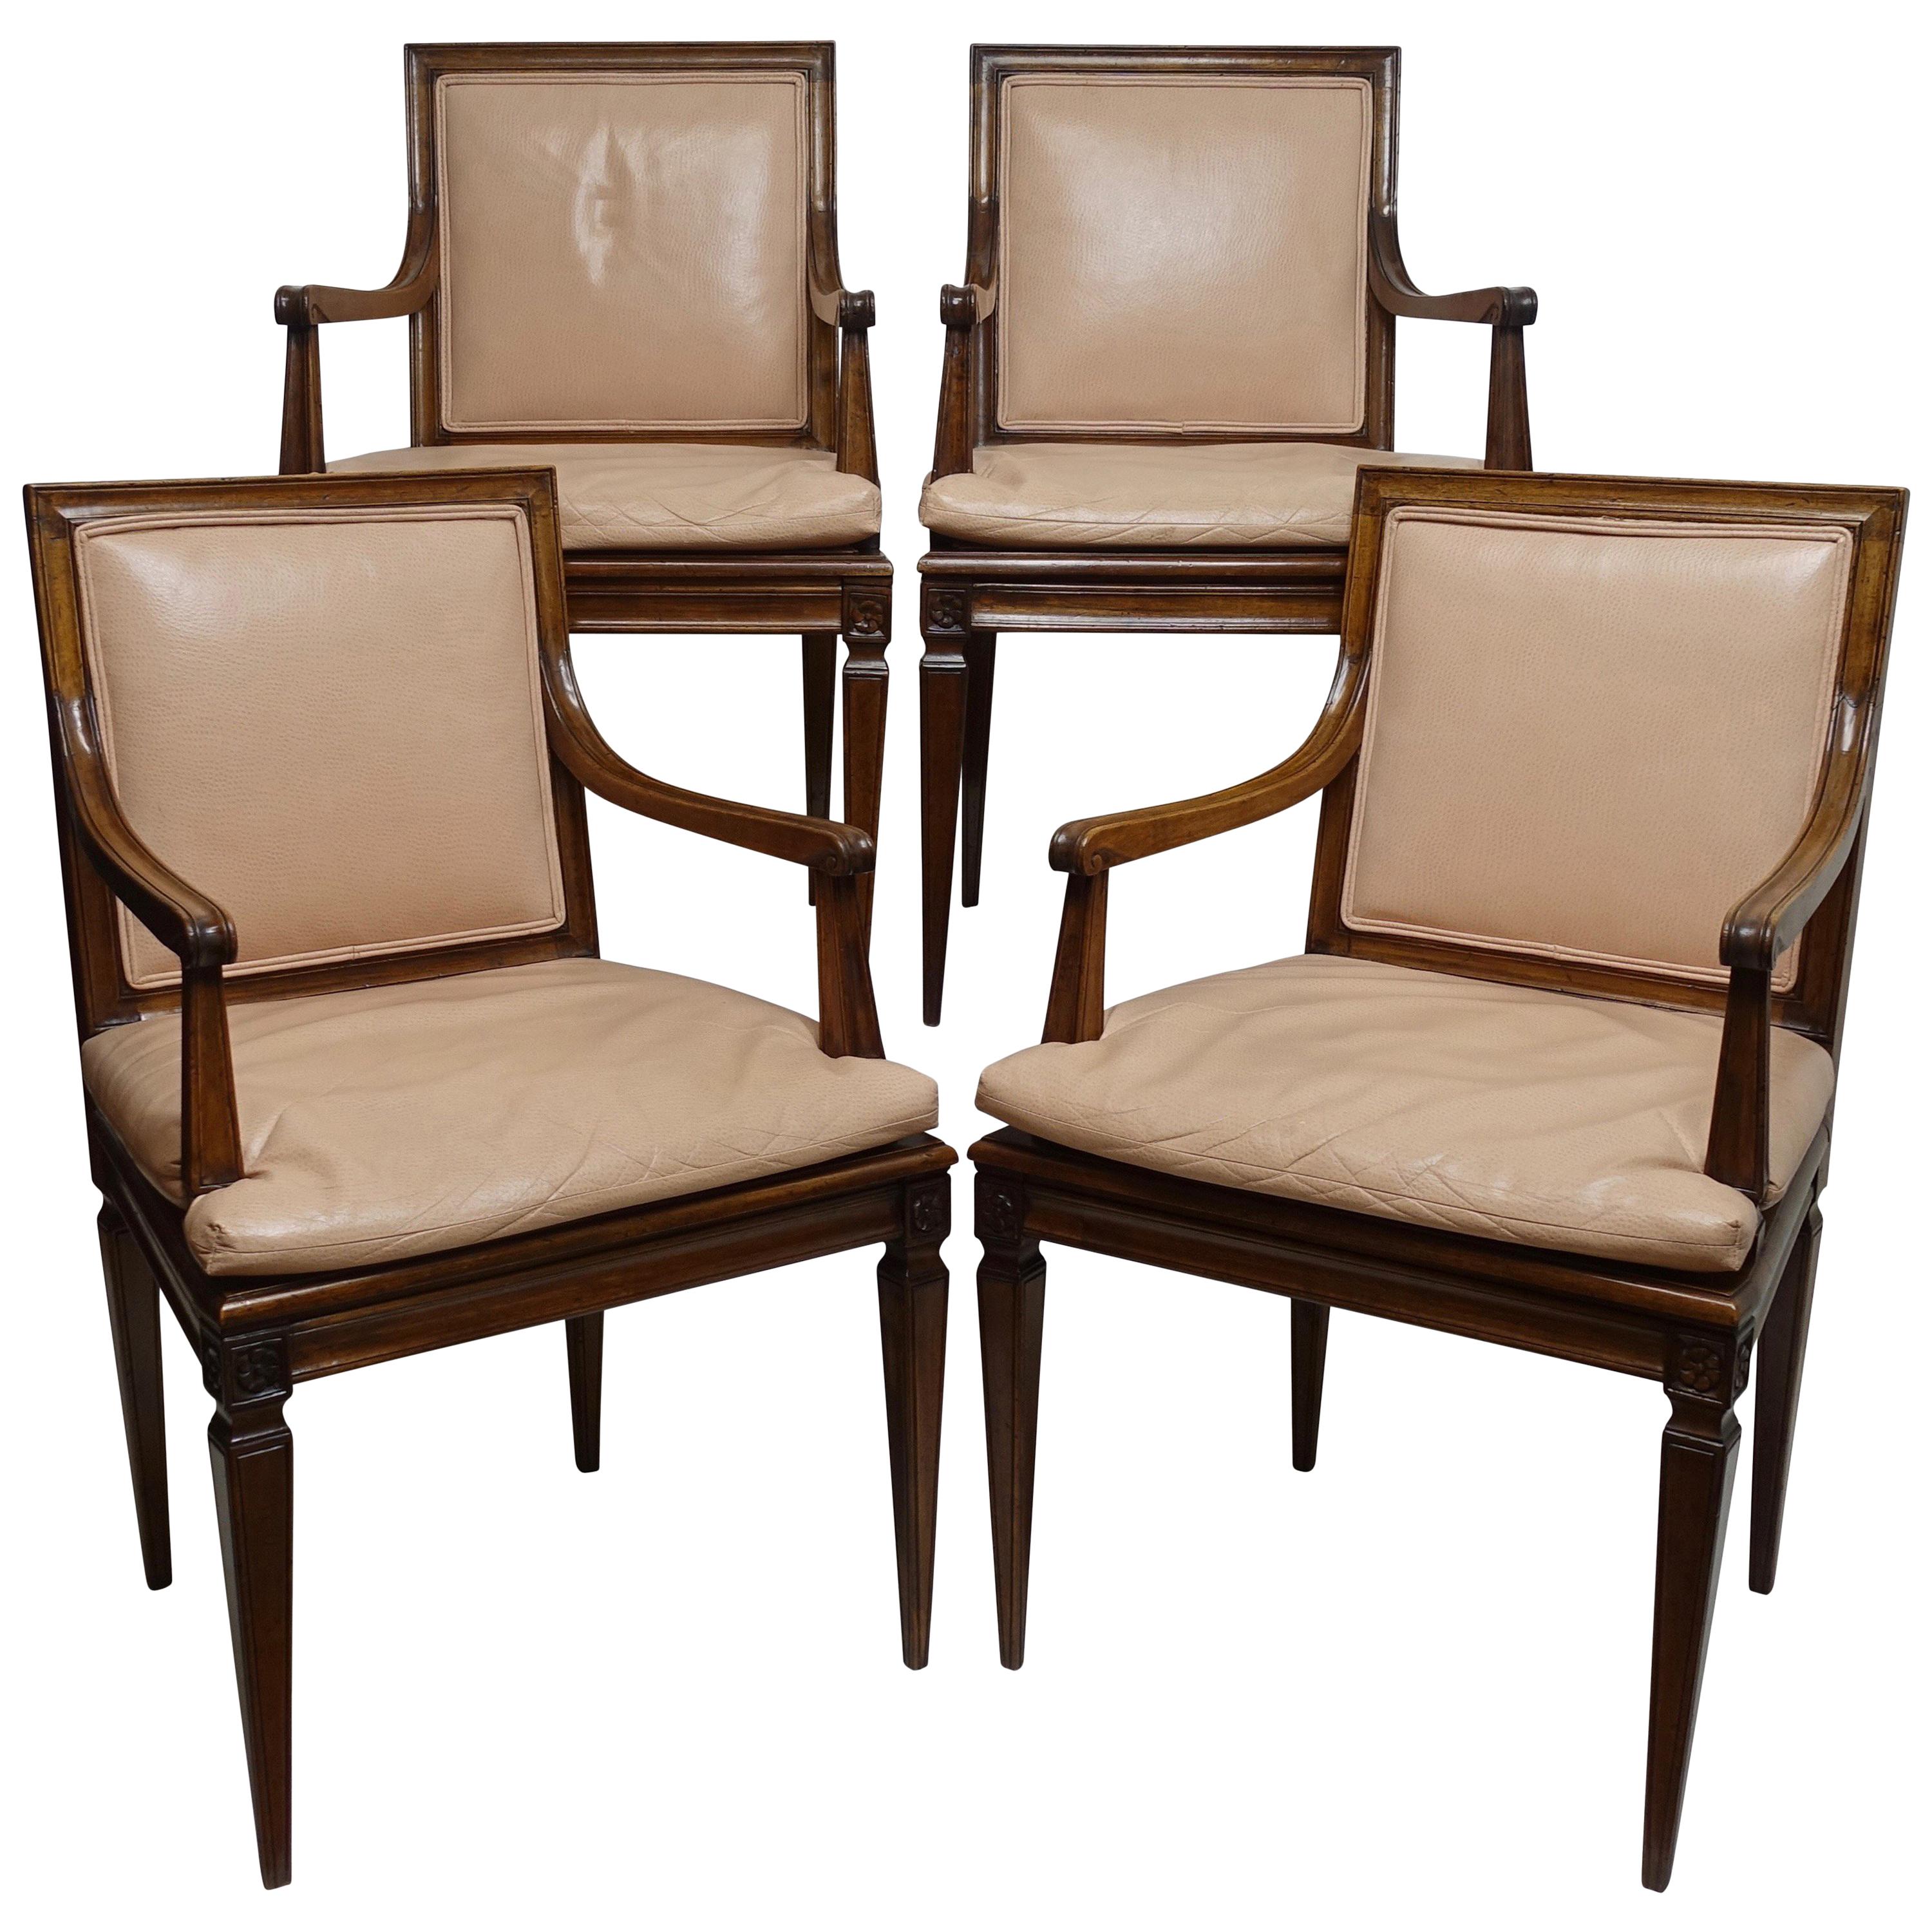 Set of Four Neoclassical Style Armchairs, Italian, Late 19th-Early 20th Century